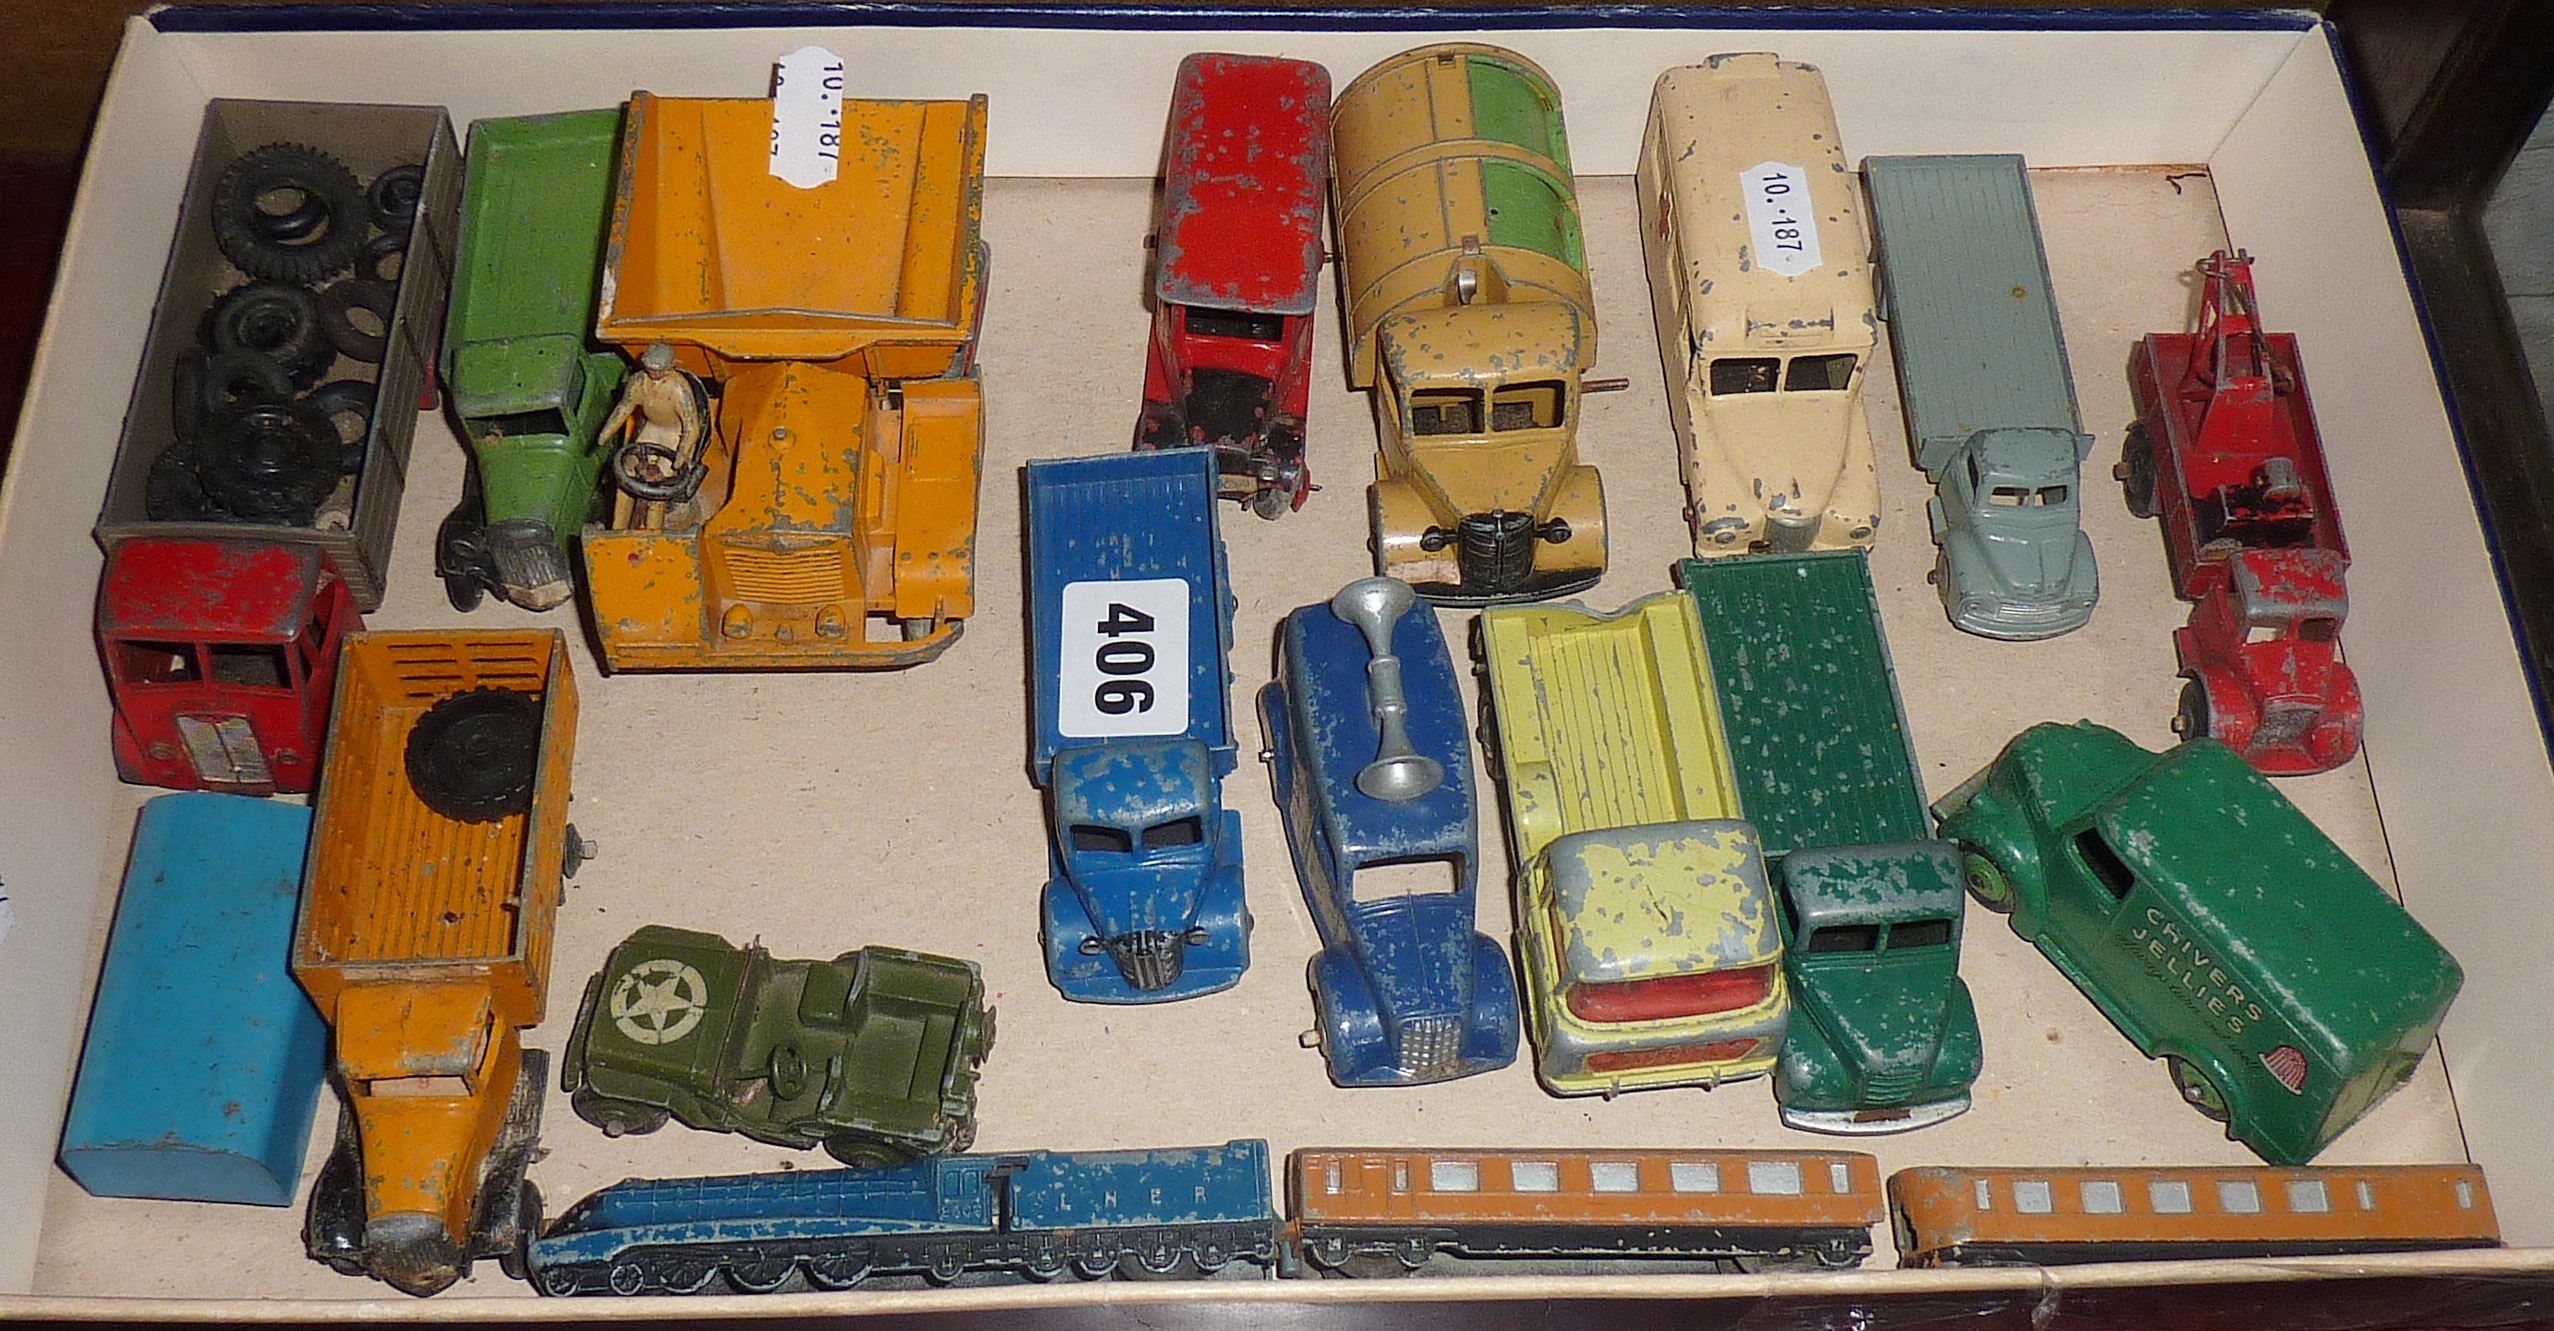 Early Dinky Toys die-cast commercial trucks, train, advertising and military vehicles (16)